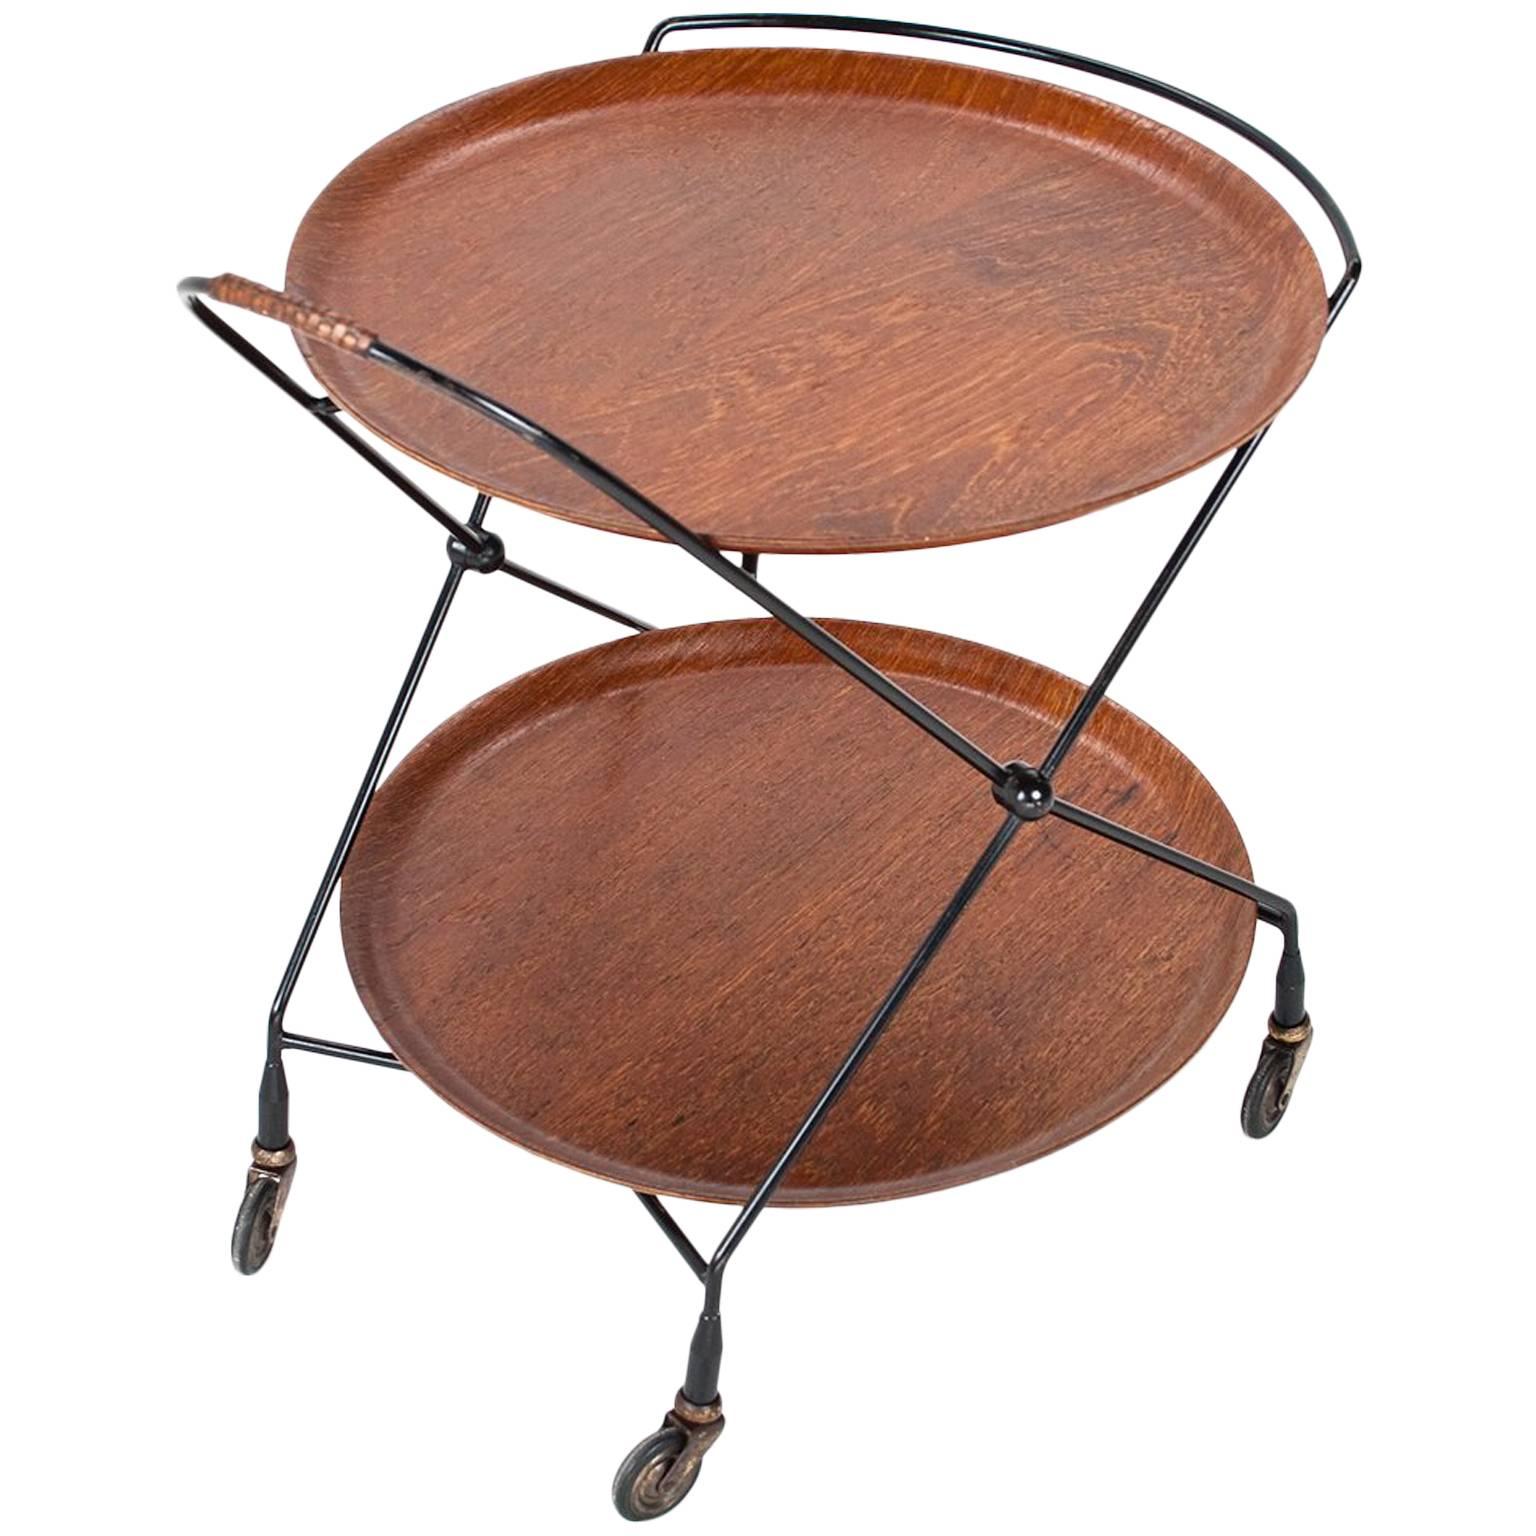 1950s Swedish Mid-Century Serving Table or Trolley in Teak and Lacquered Metal